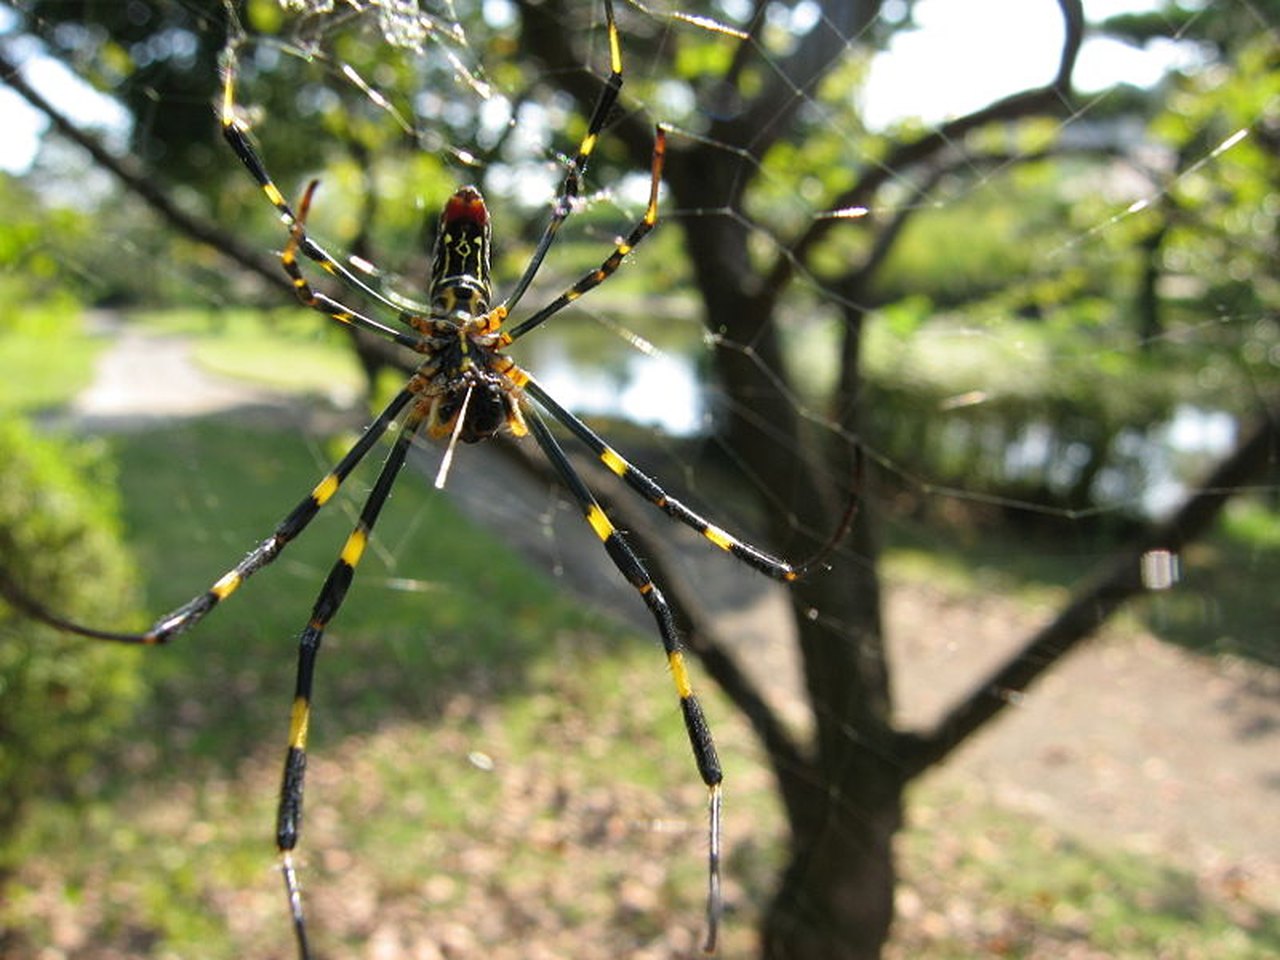 Large Invasive Spider Species Growing in 'Extreme Numbers' in Georgia